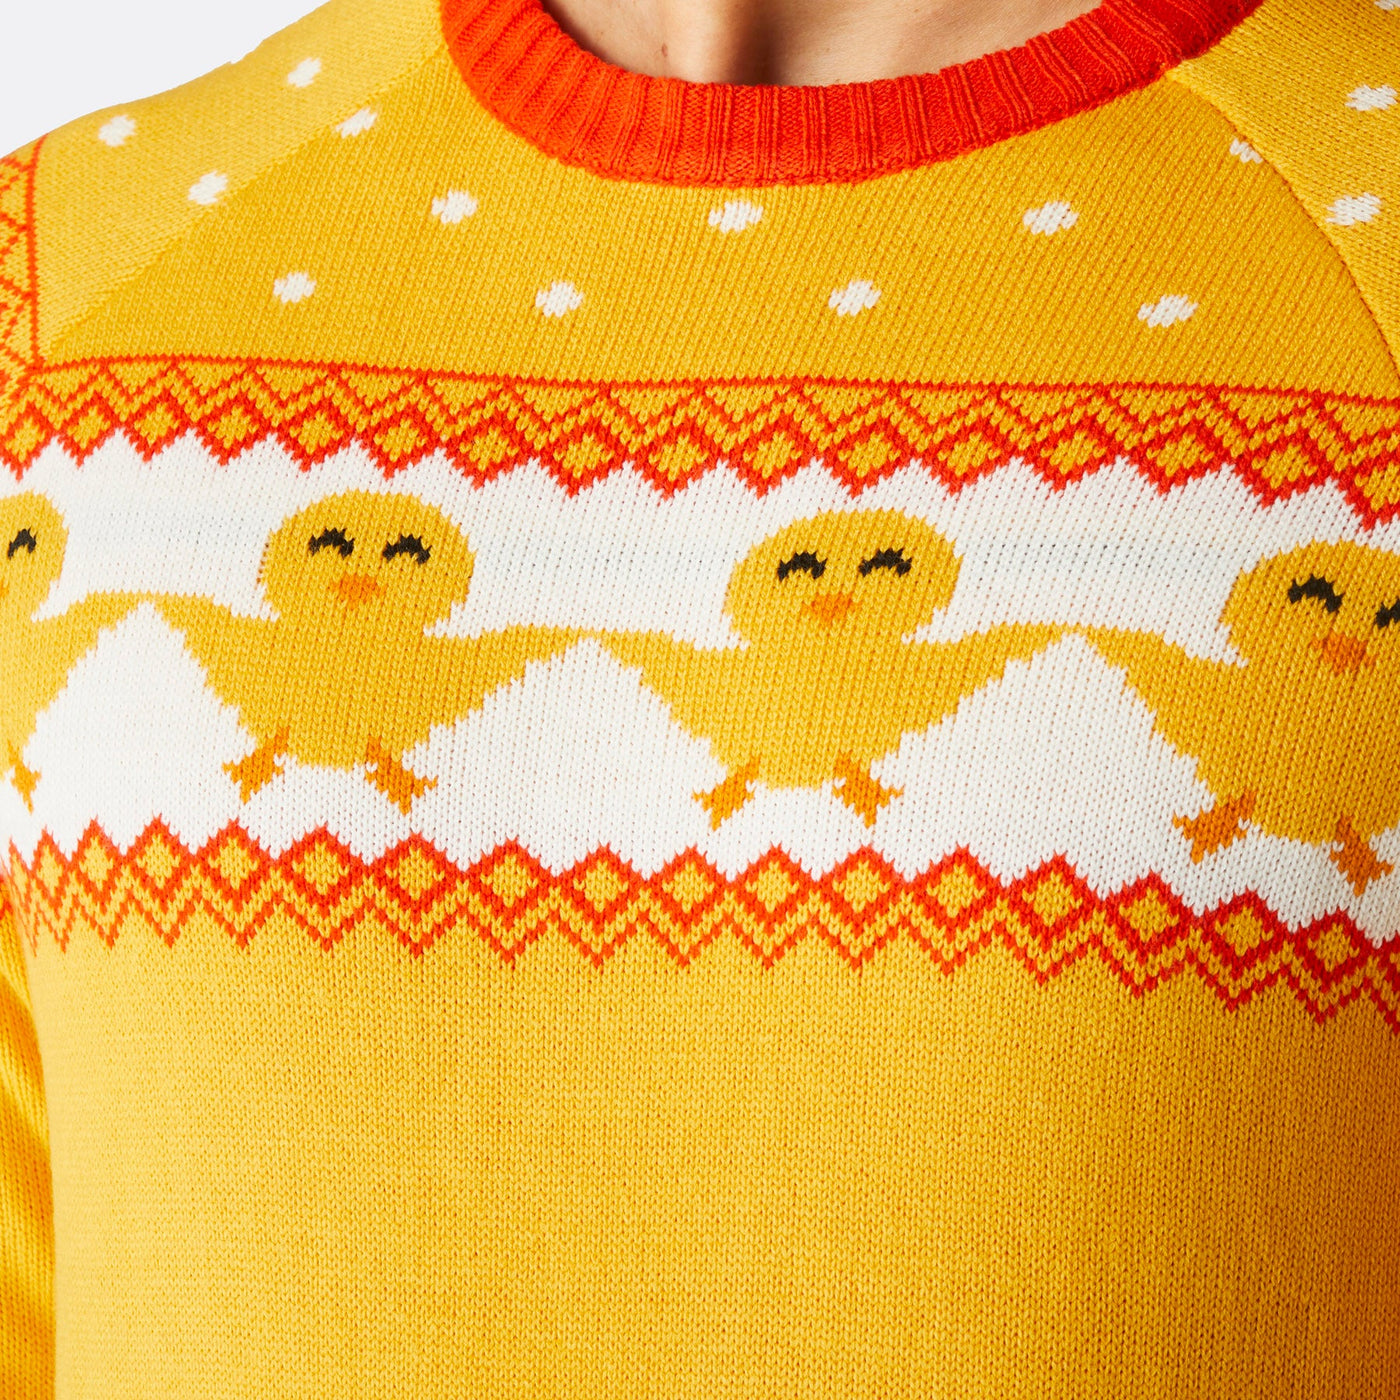 Womens Yellow Easter Sweater